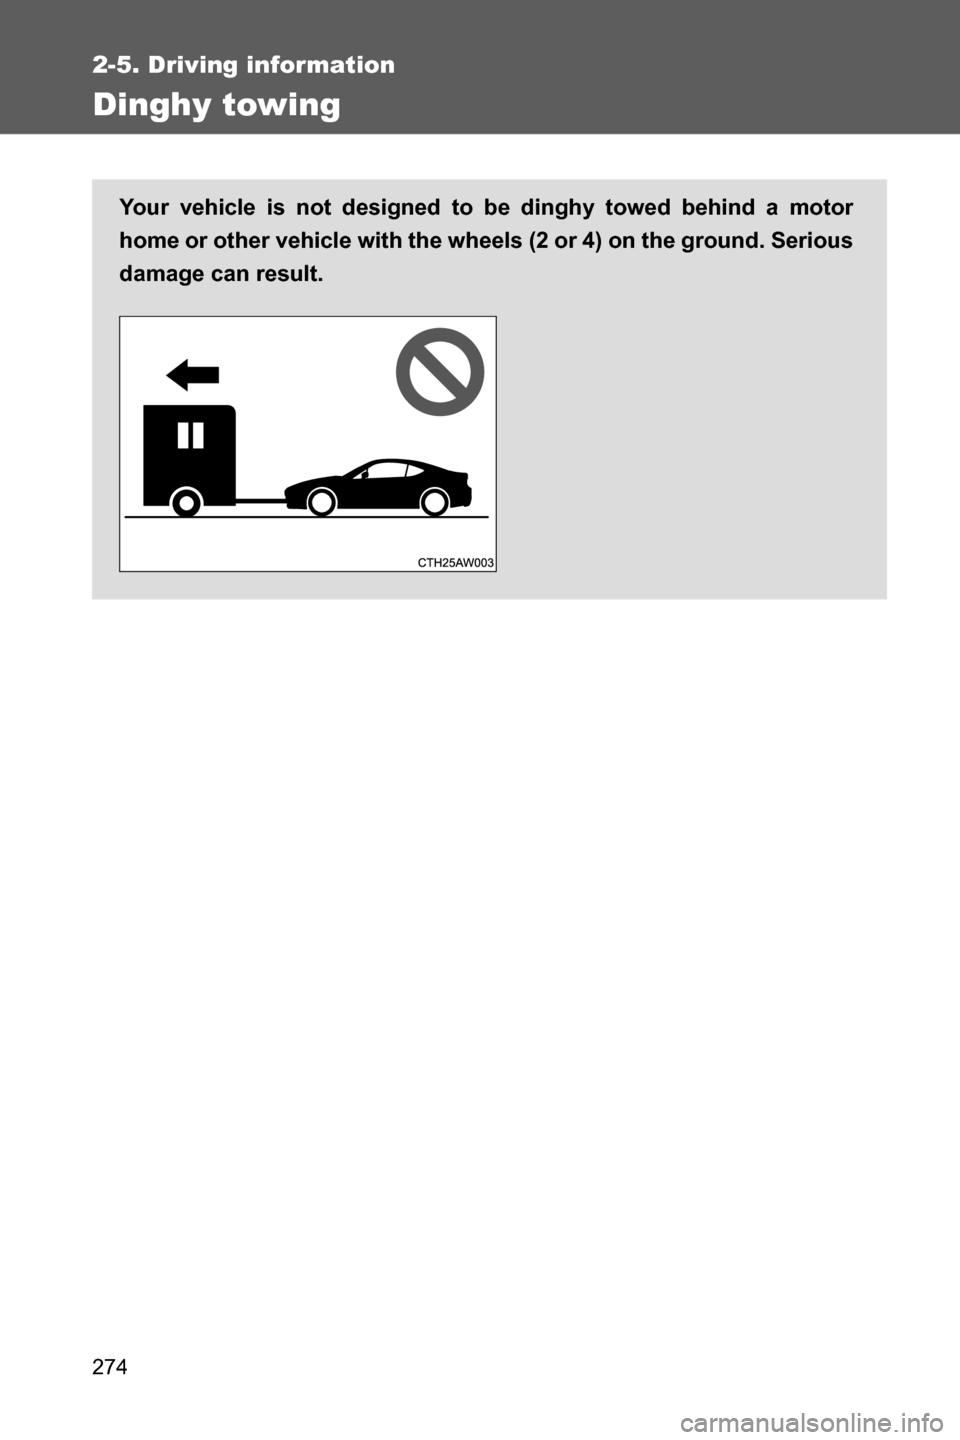 SUBARU BRZ 2017 1.G Owners Manual 274
2-5. Driving information
Dinghy towing
Your vehicle is not designed to be dinghy towed behind a motor
home or other vehicle with the wheels (2 or 4) on the ground. Serious
damage can result.  